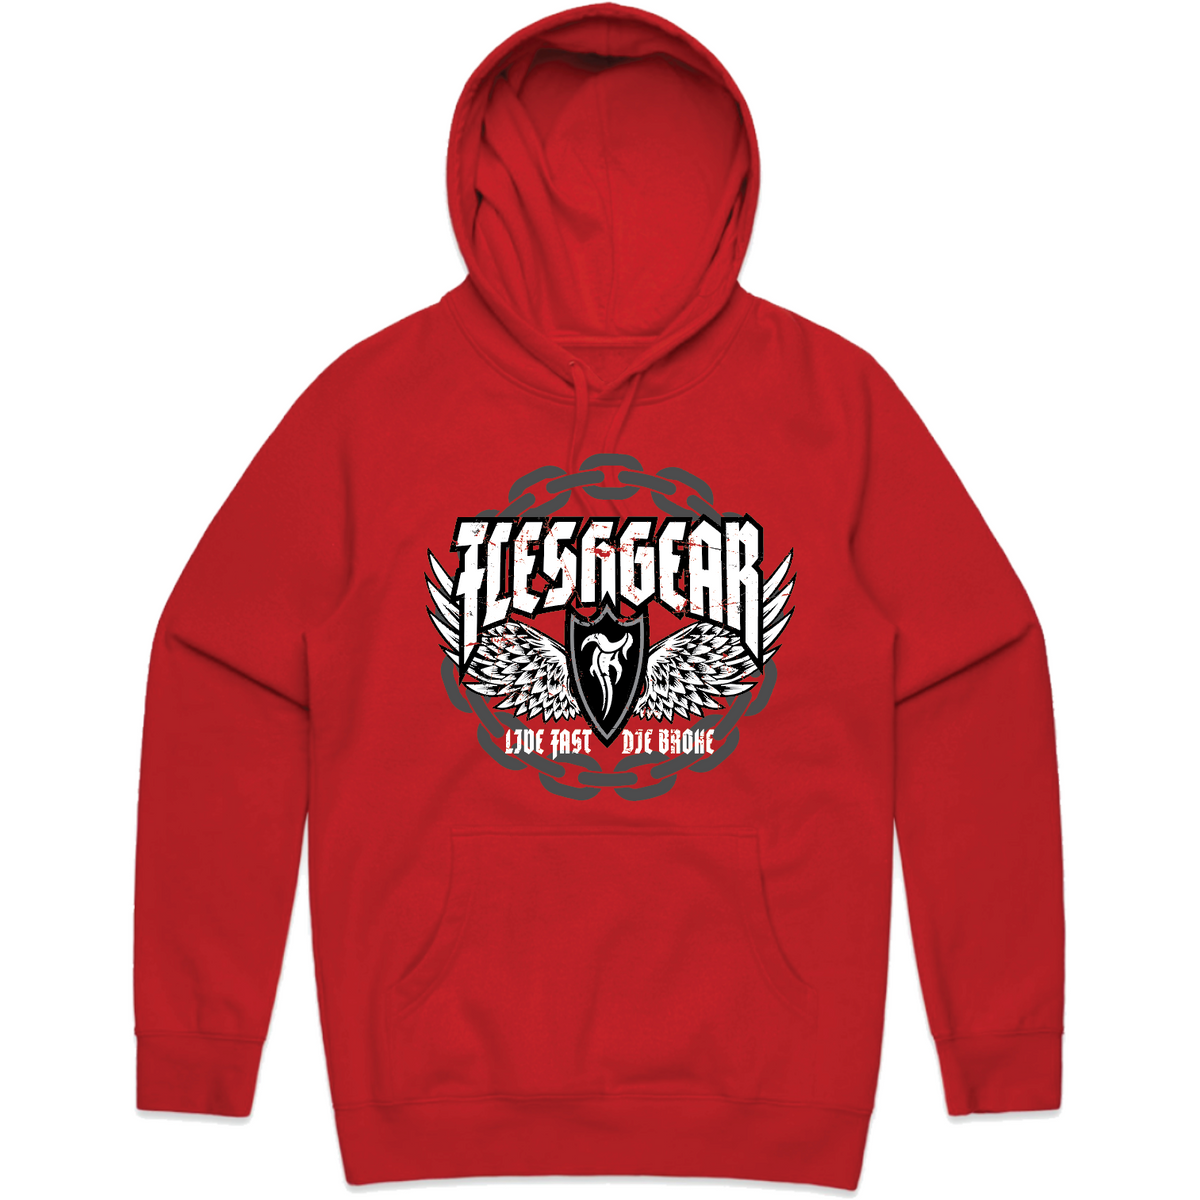 FLESHGEAR-Men's-Knit-Hooded-Pullover-Chain - PULLOVER HOODIE - Synik Clothing - synikclothing.com